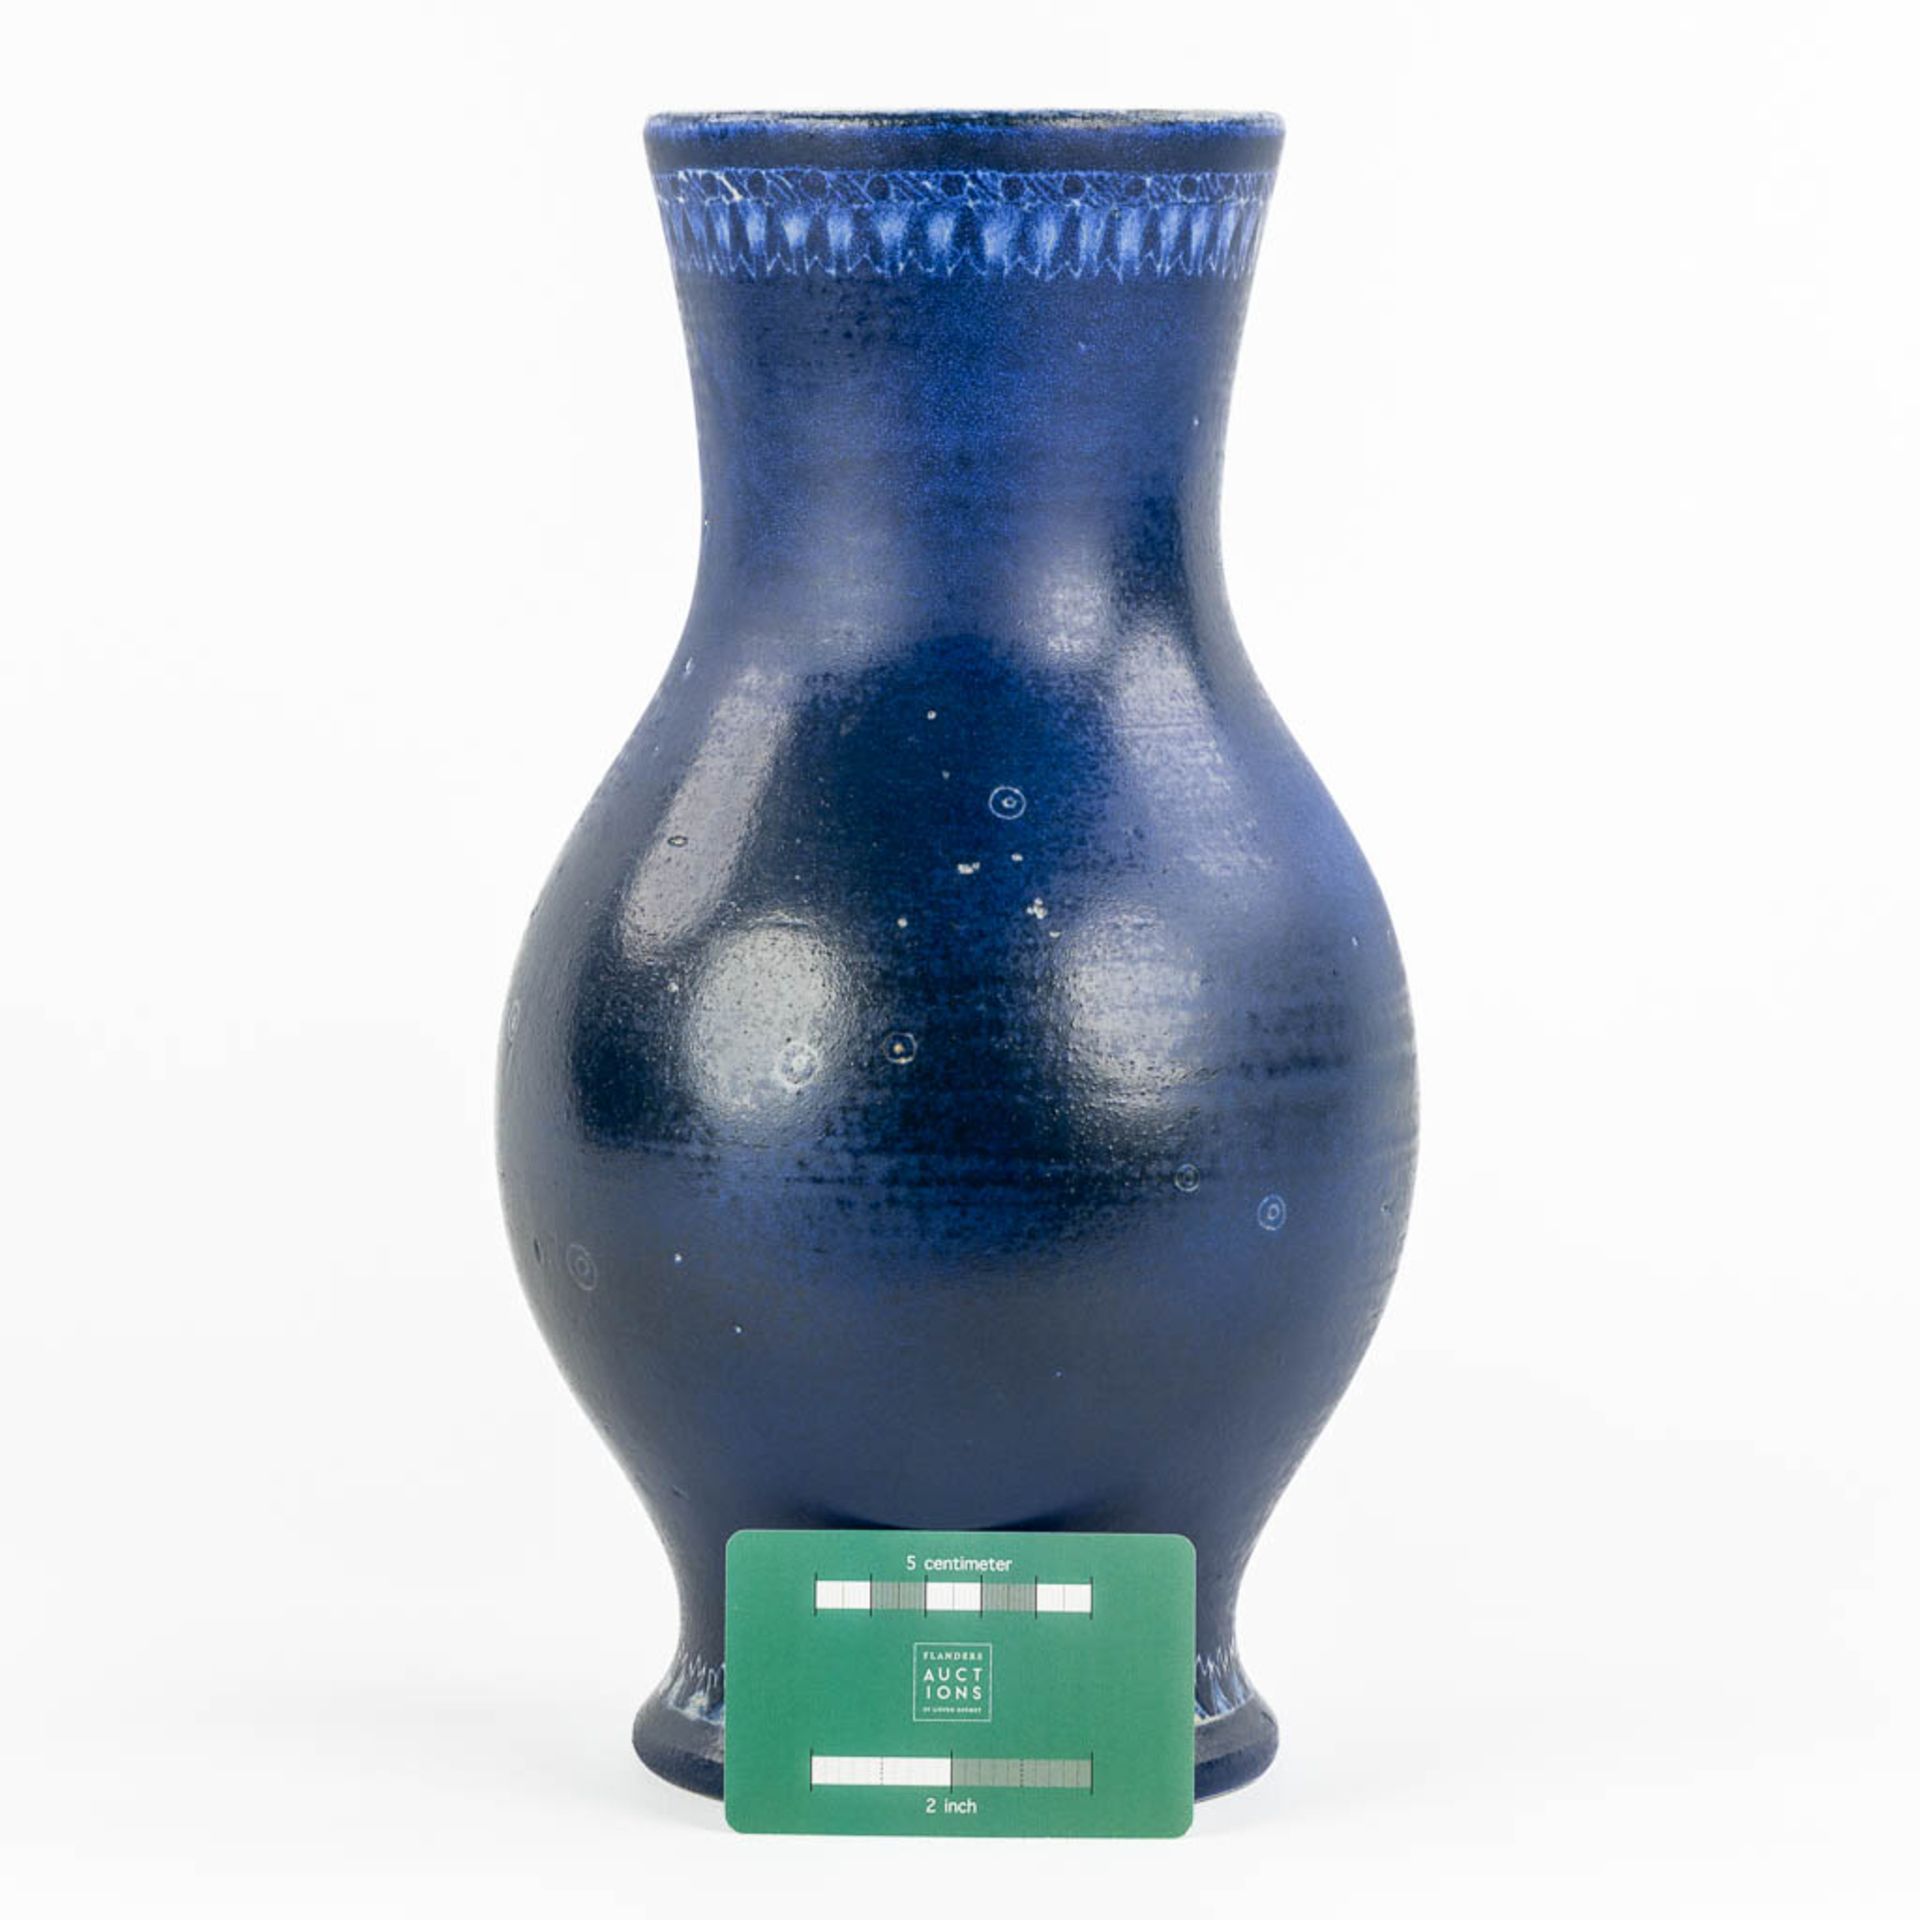 A vase with blue glaze, glazed ceramics for Perignem. From the early periods. (H:31,5 x D:18 cm) - Image 2 of 11